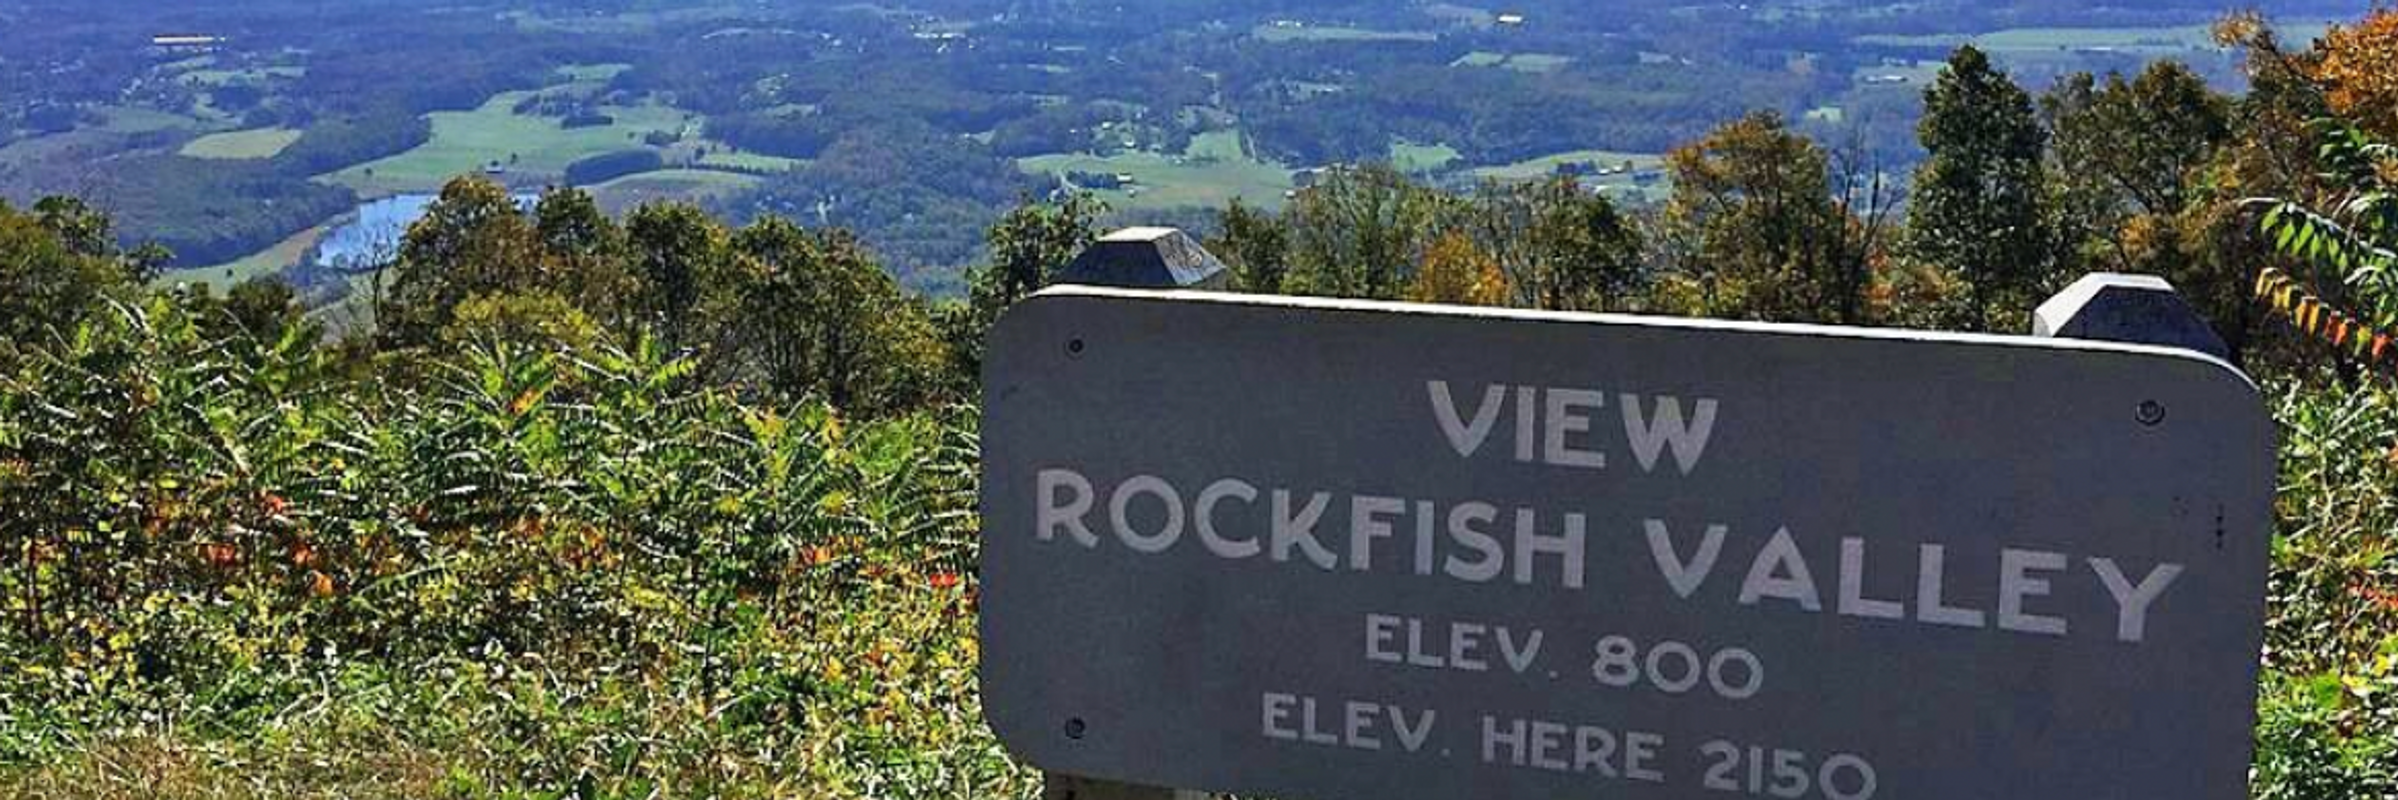 Rockfish Valley Nelson County